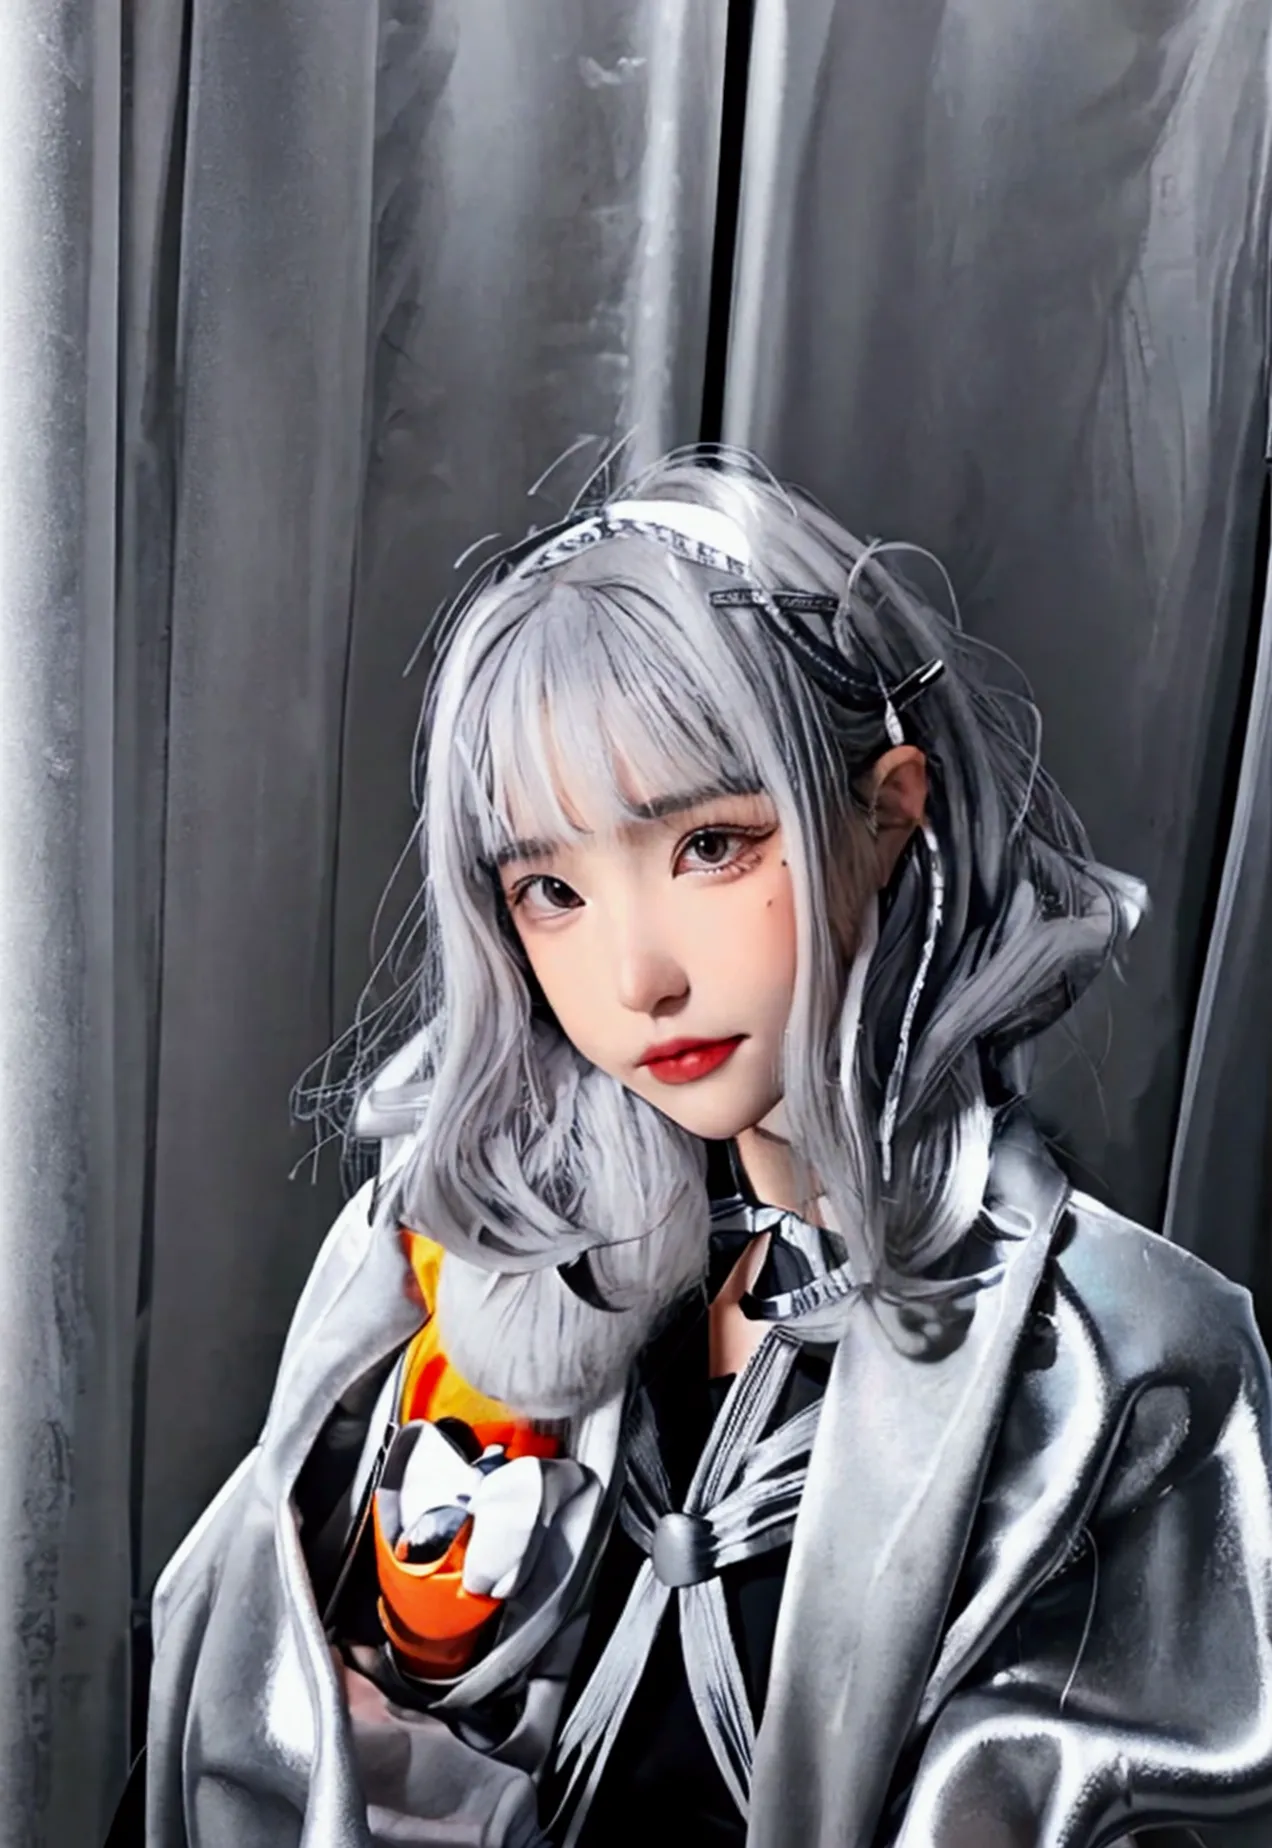 there is a woman with a orange coat, wearing silver hair, grey hair, silver hair, cloudy grey hair, with short hair, some grey h...